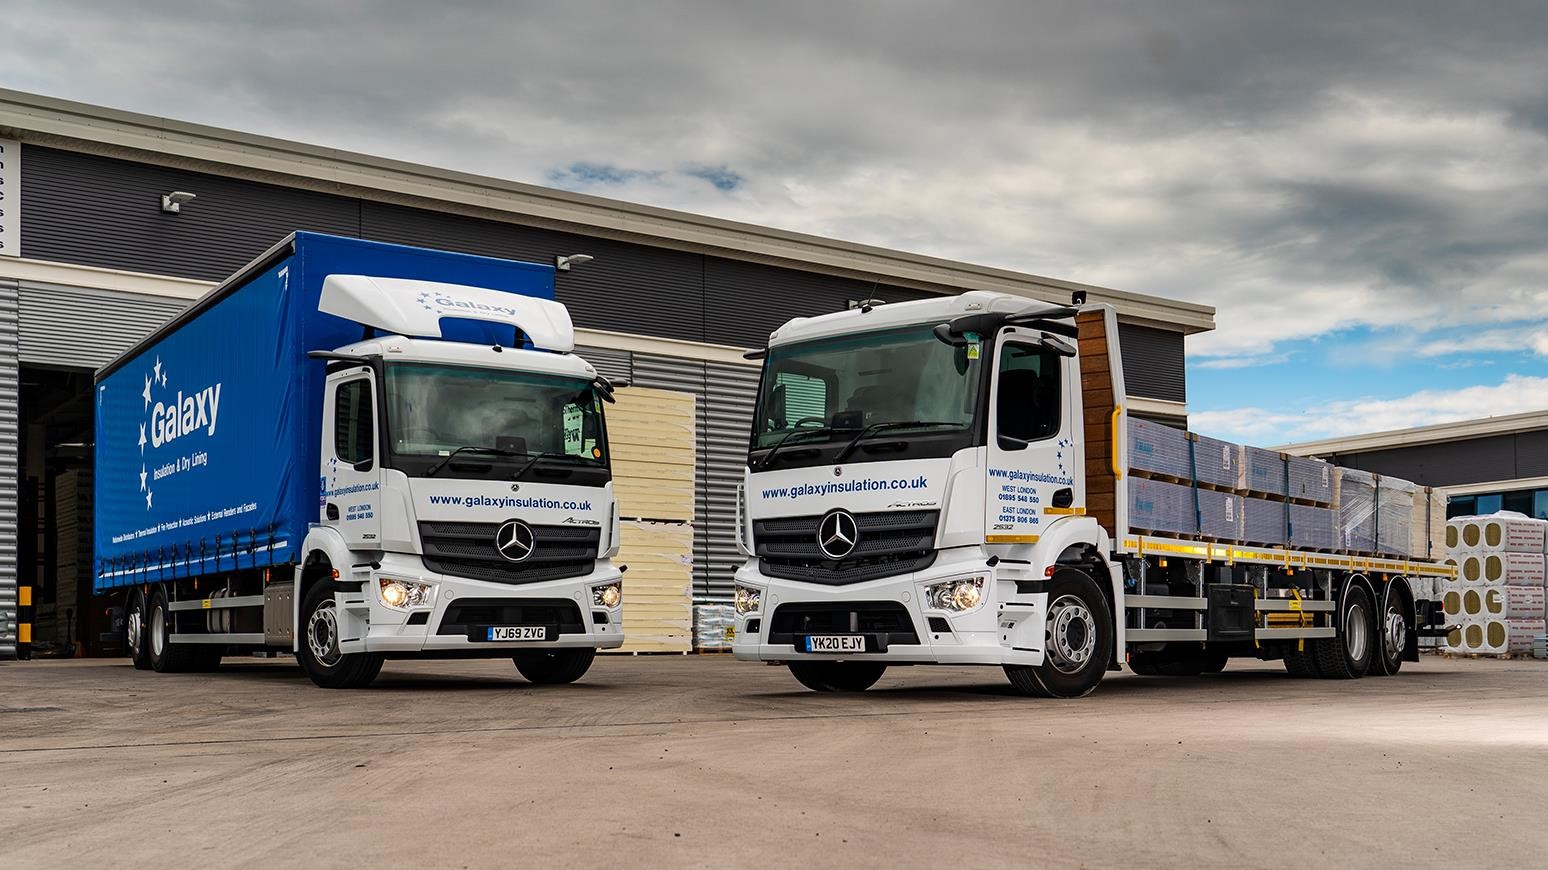 Mercedes-Benz Actros Provides 4-Star Visibility For Galaxy Insultation & Dry Lining